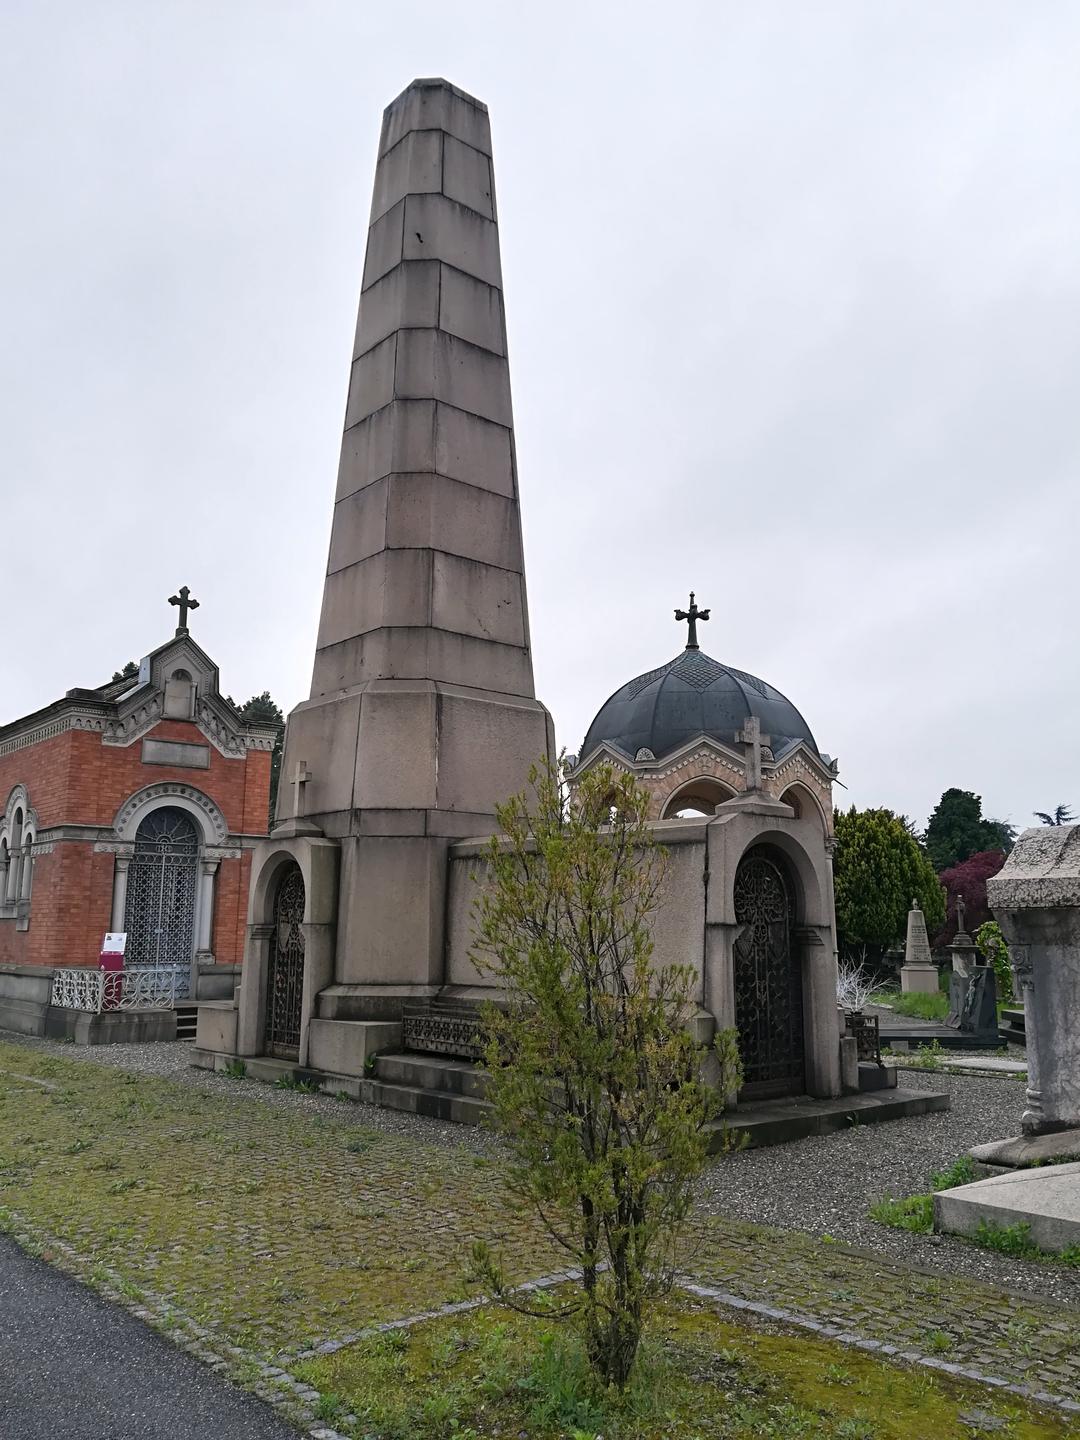 MMC3 Visit to Monumental Cimitery of Turin